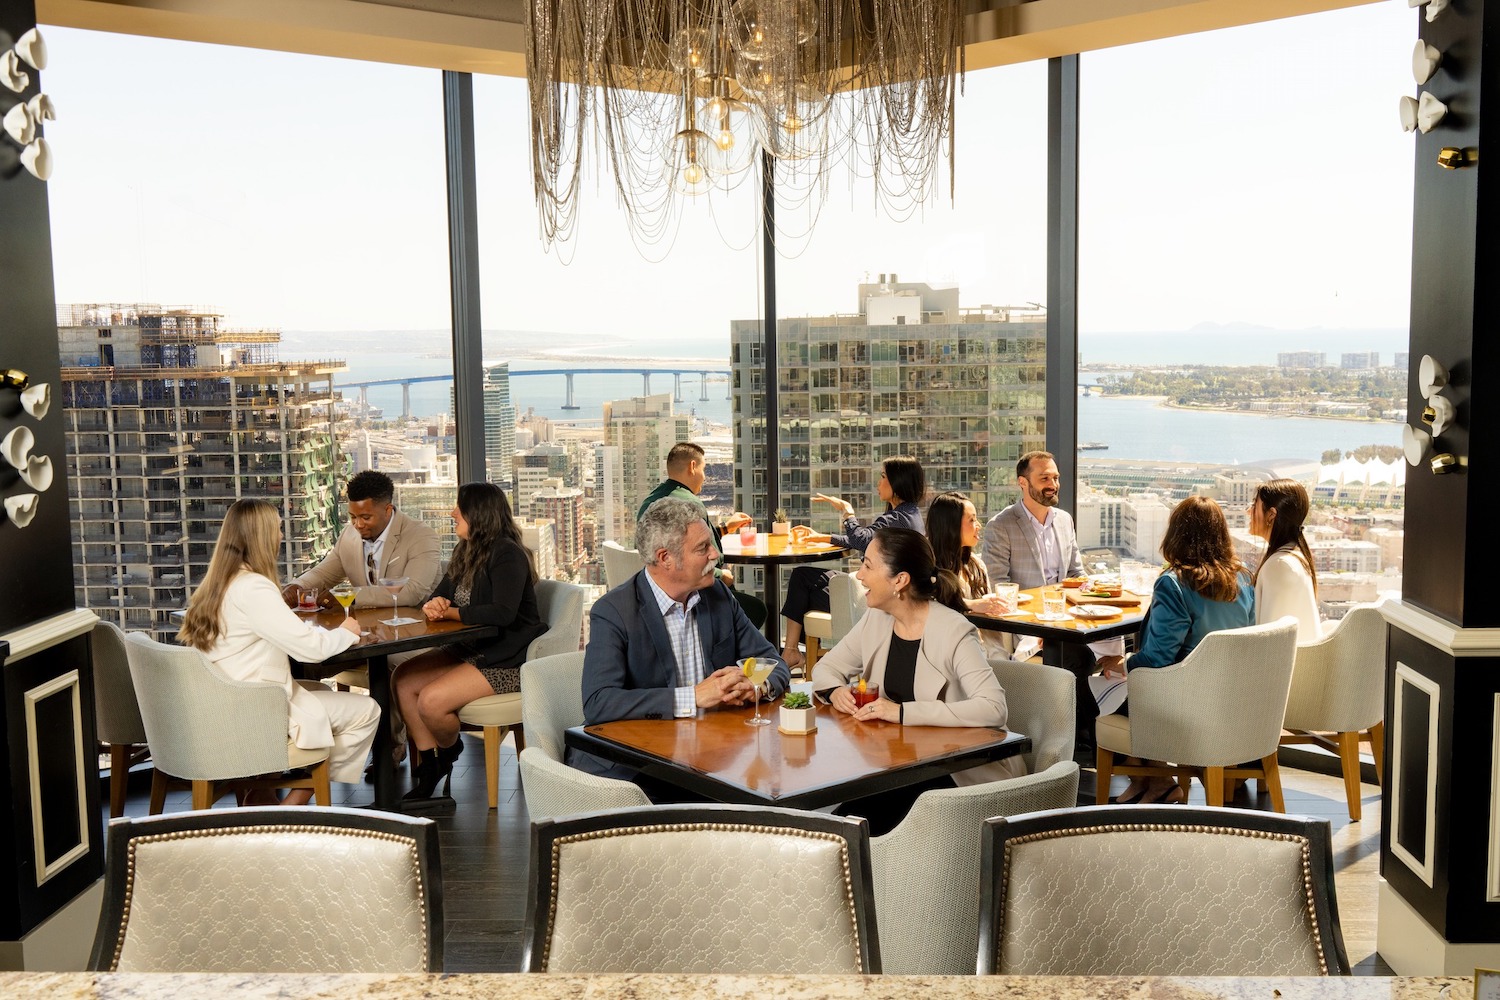 People dining at the University Club in Downtown San Diego featuring picturesque view of the city and Coronado bridge